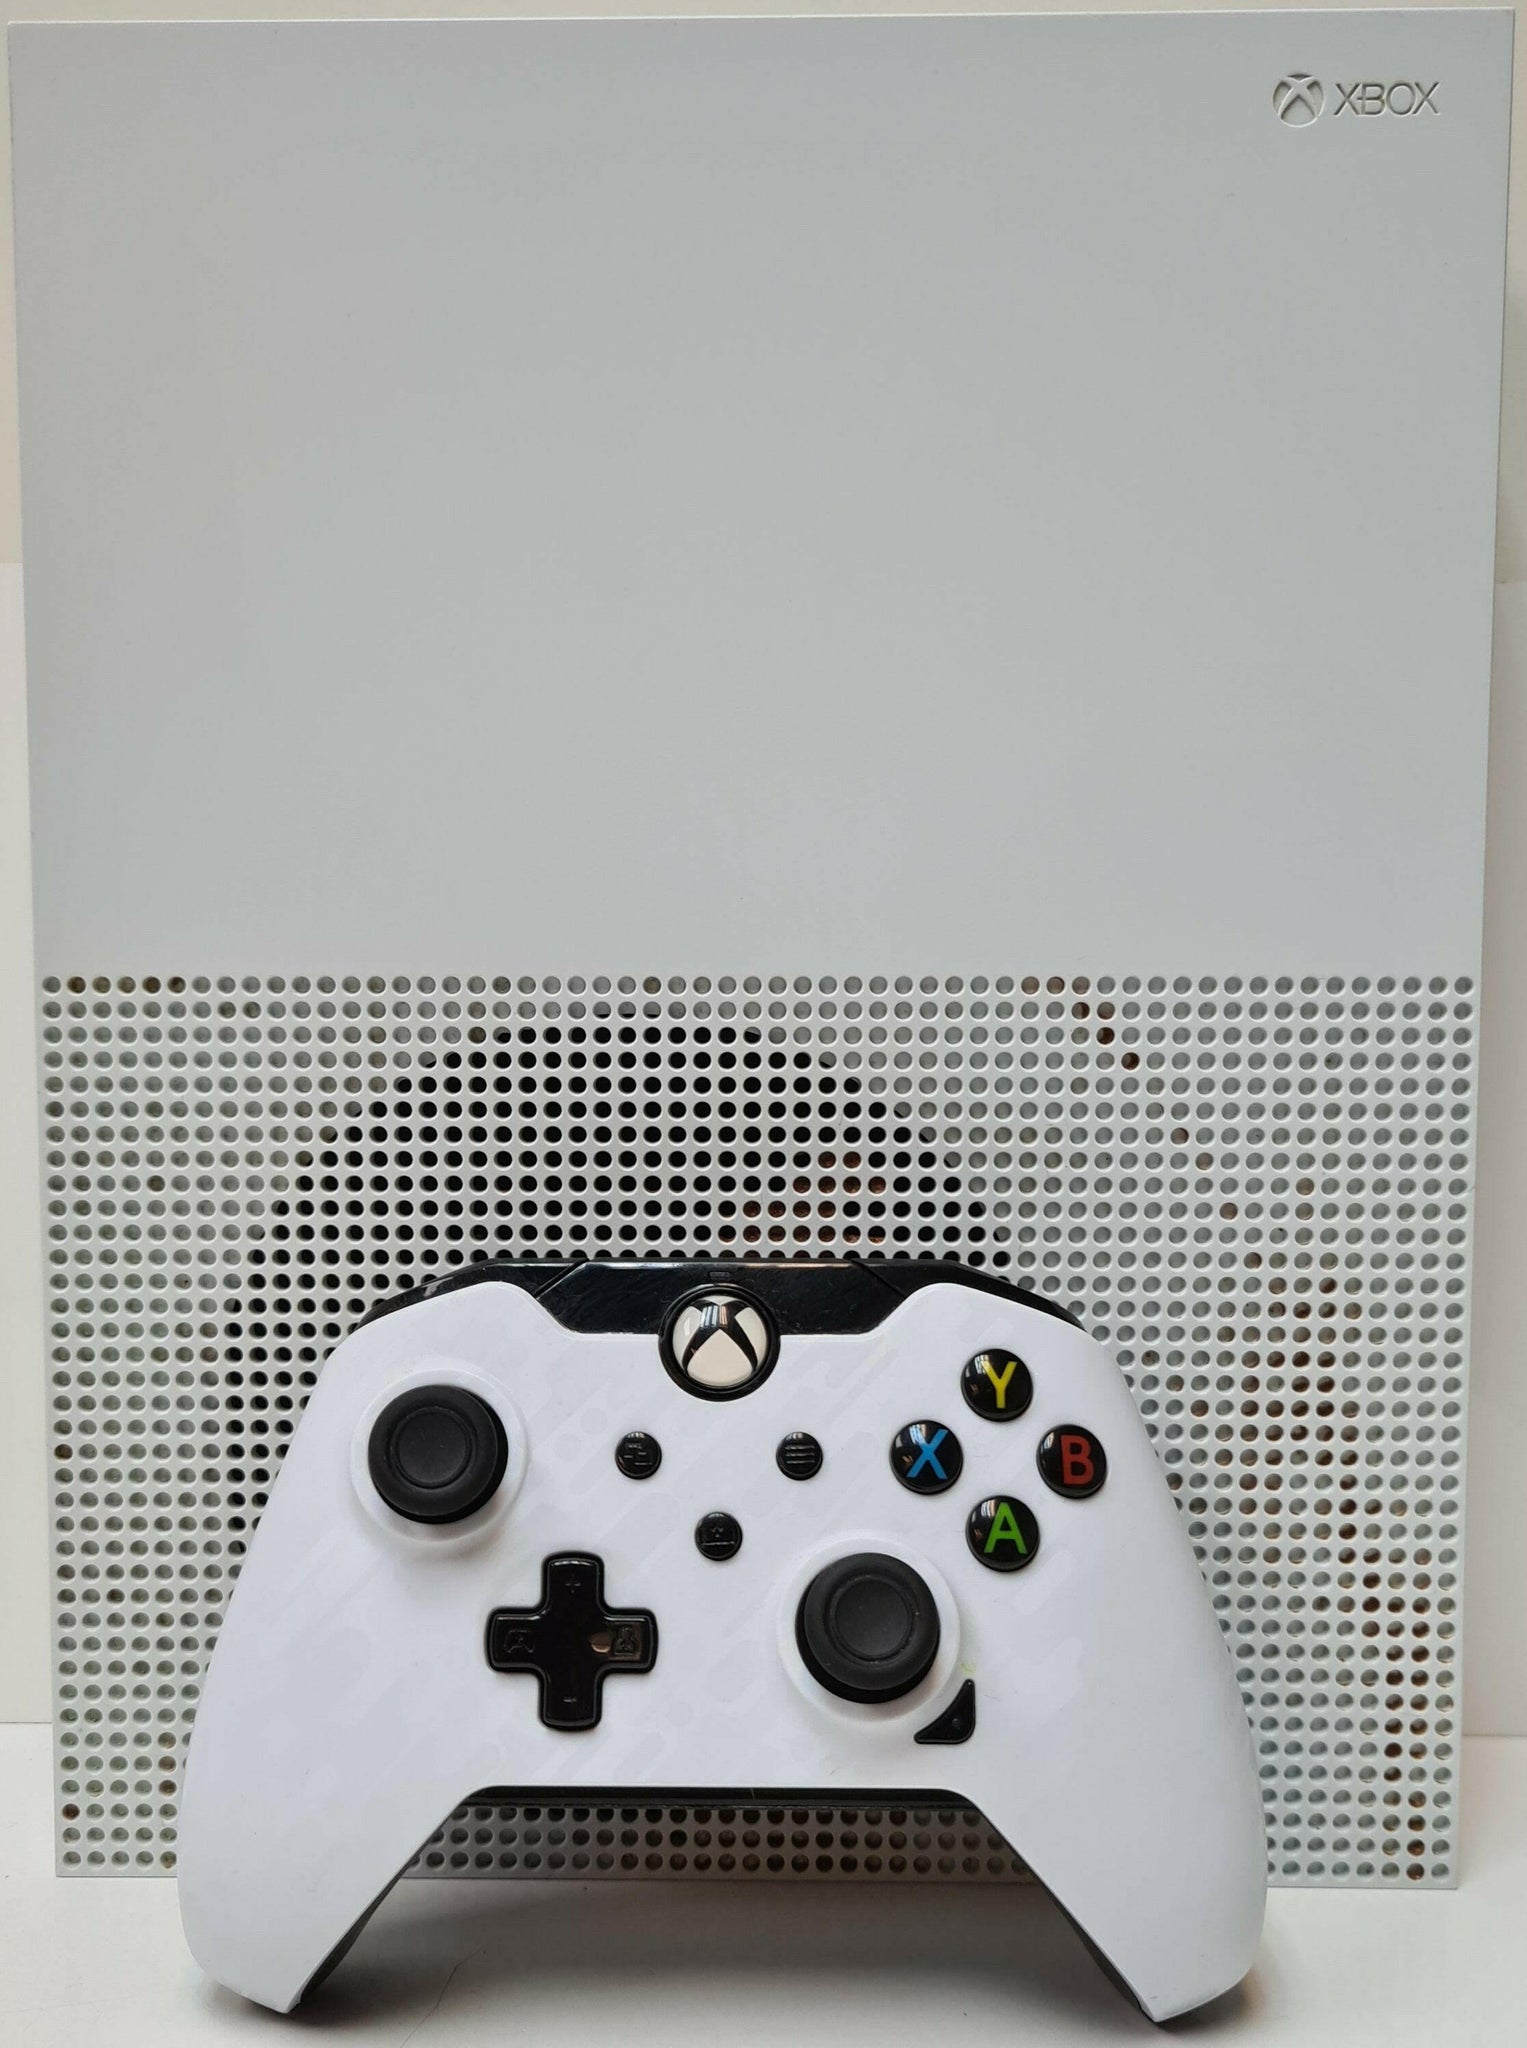 All About the Xbox One S All-Digital Edition 